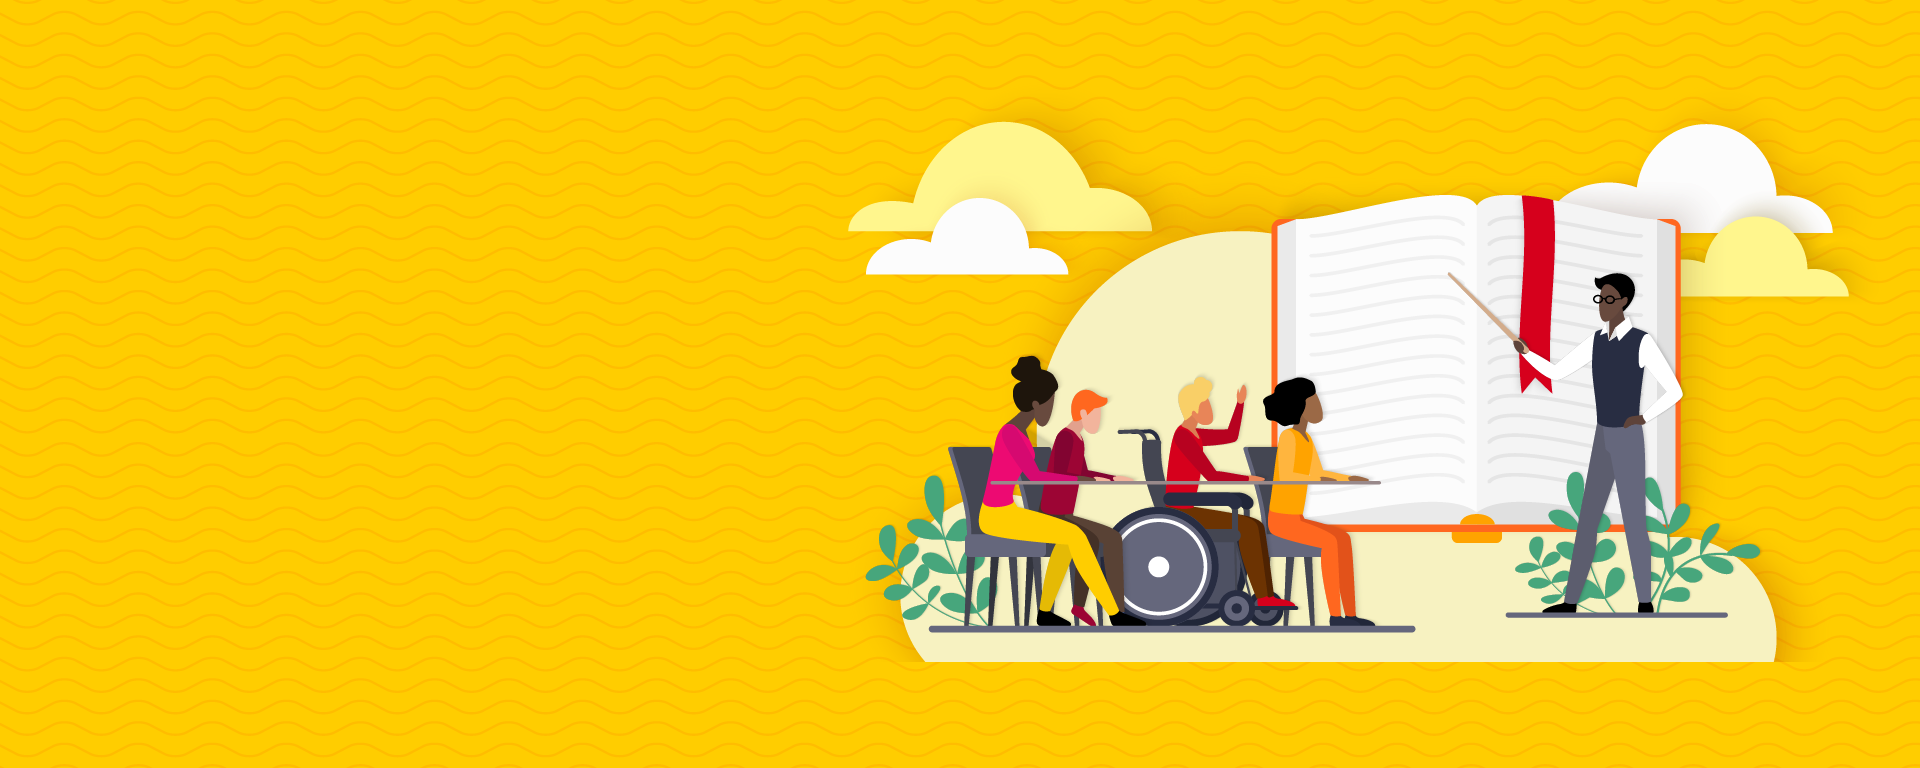 Yellow background with illustration of a diverse group of students learning in a classroom setting.